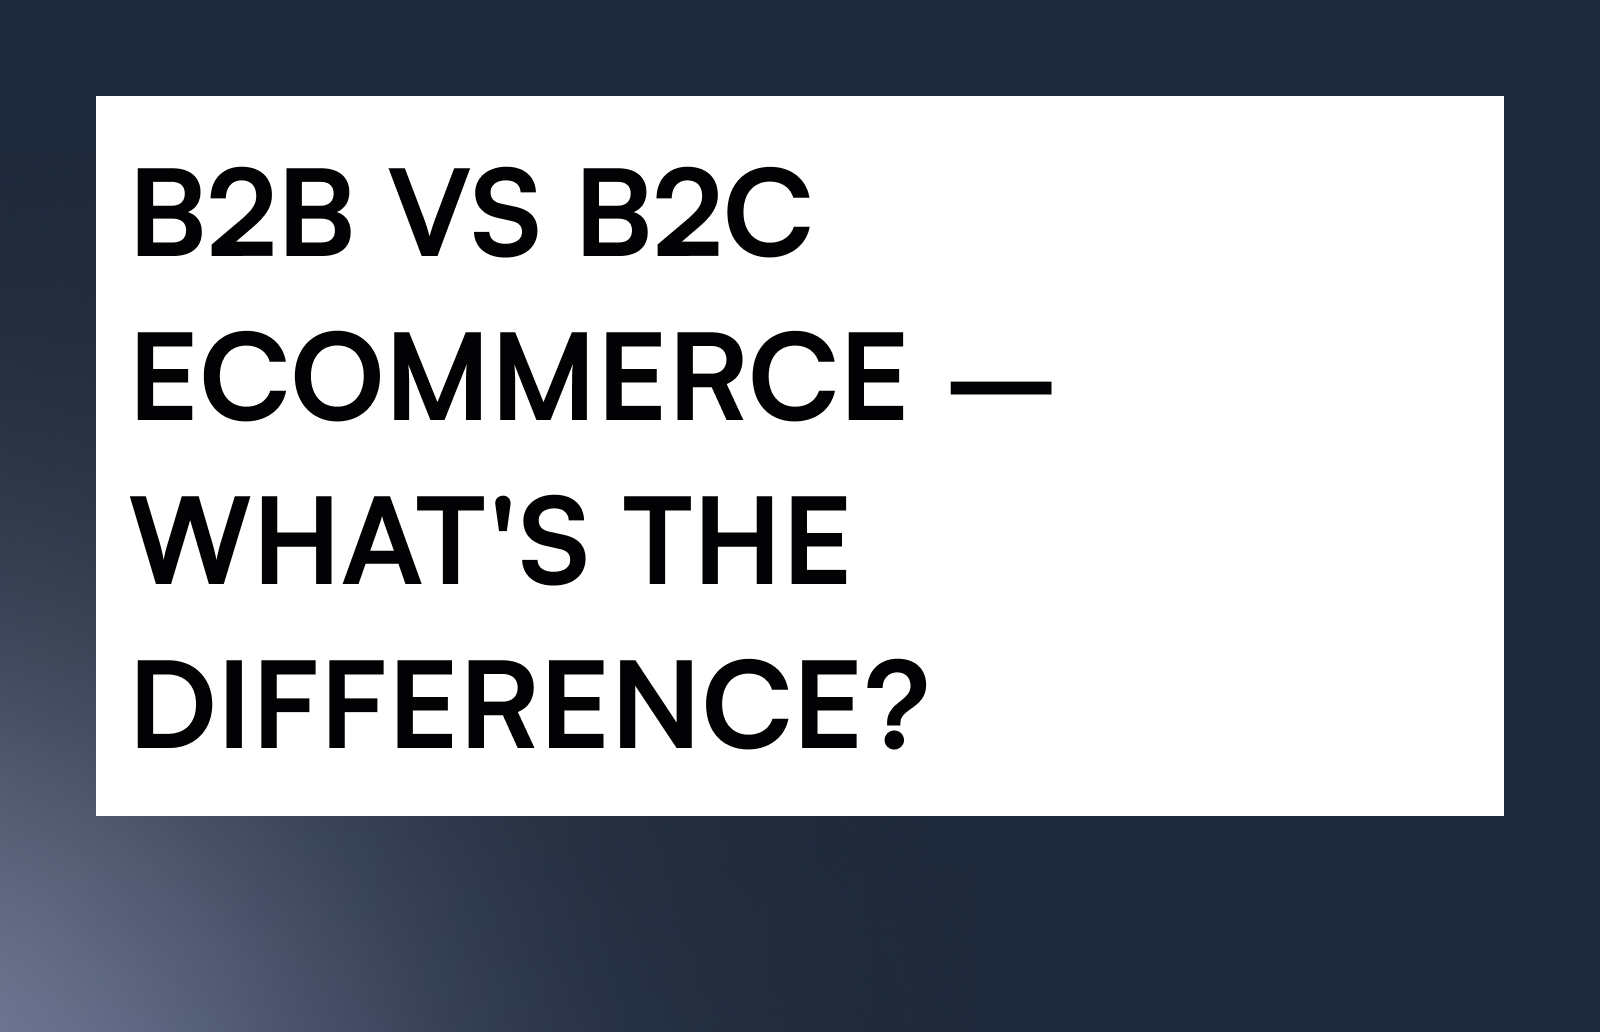 B2B VS B2C ECOMMERCE – WHAT’S THE DIFFERENCE?